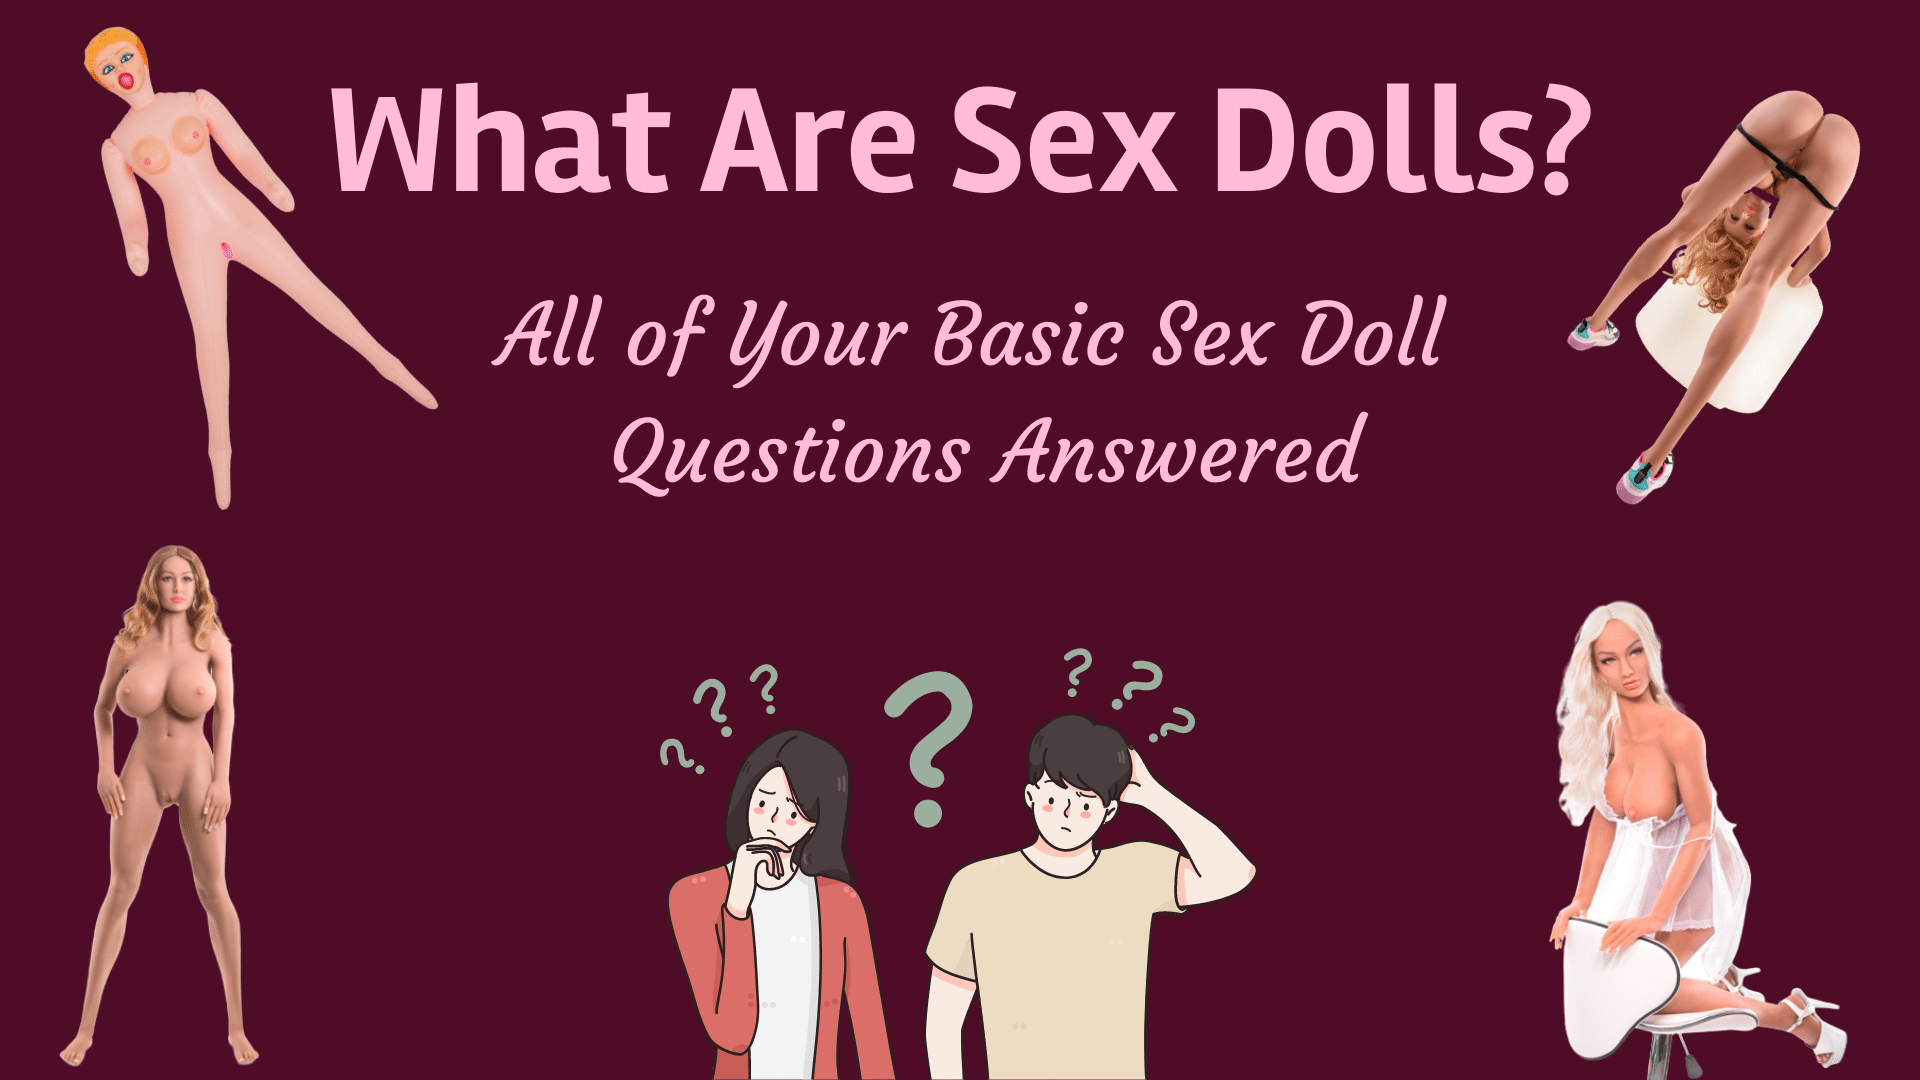 What are sex dolls?